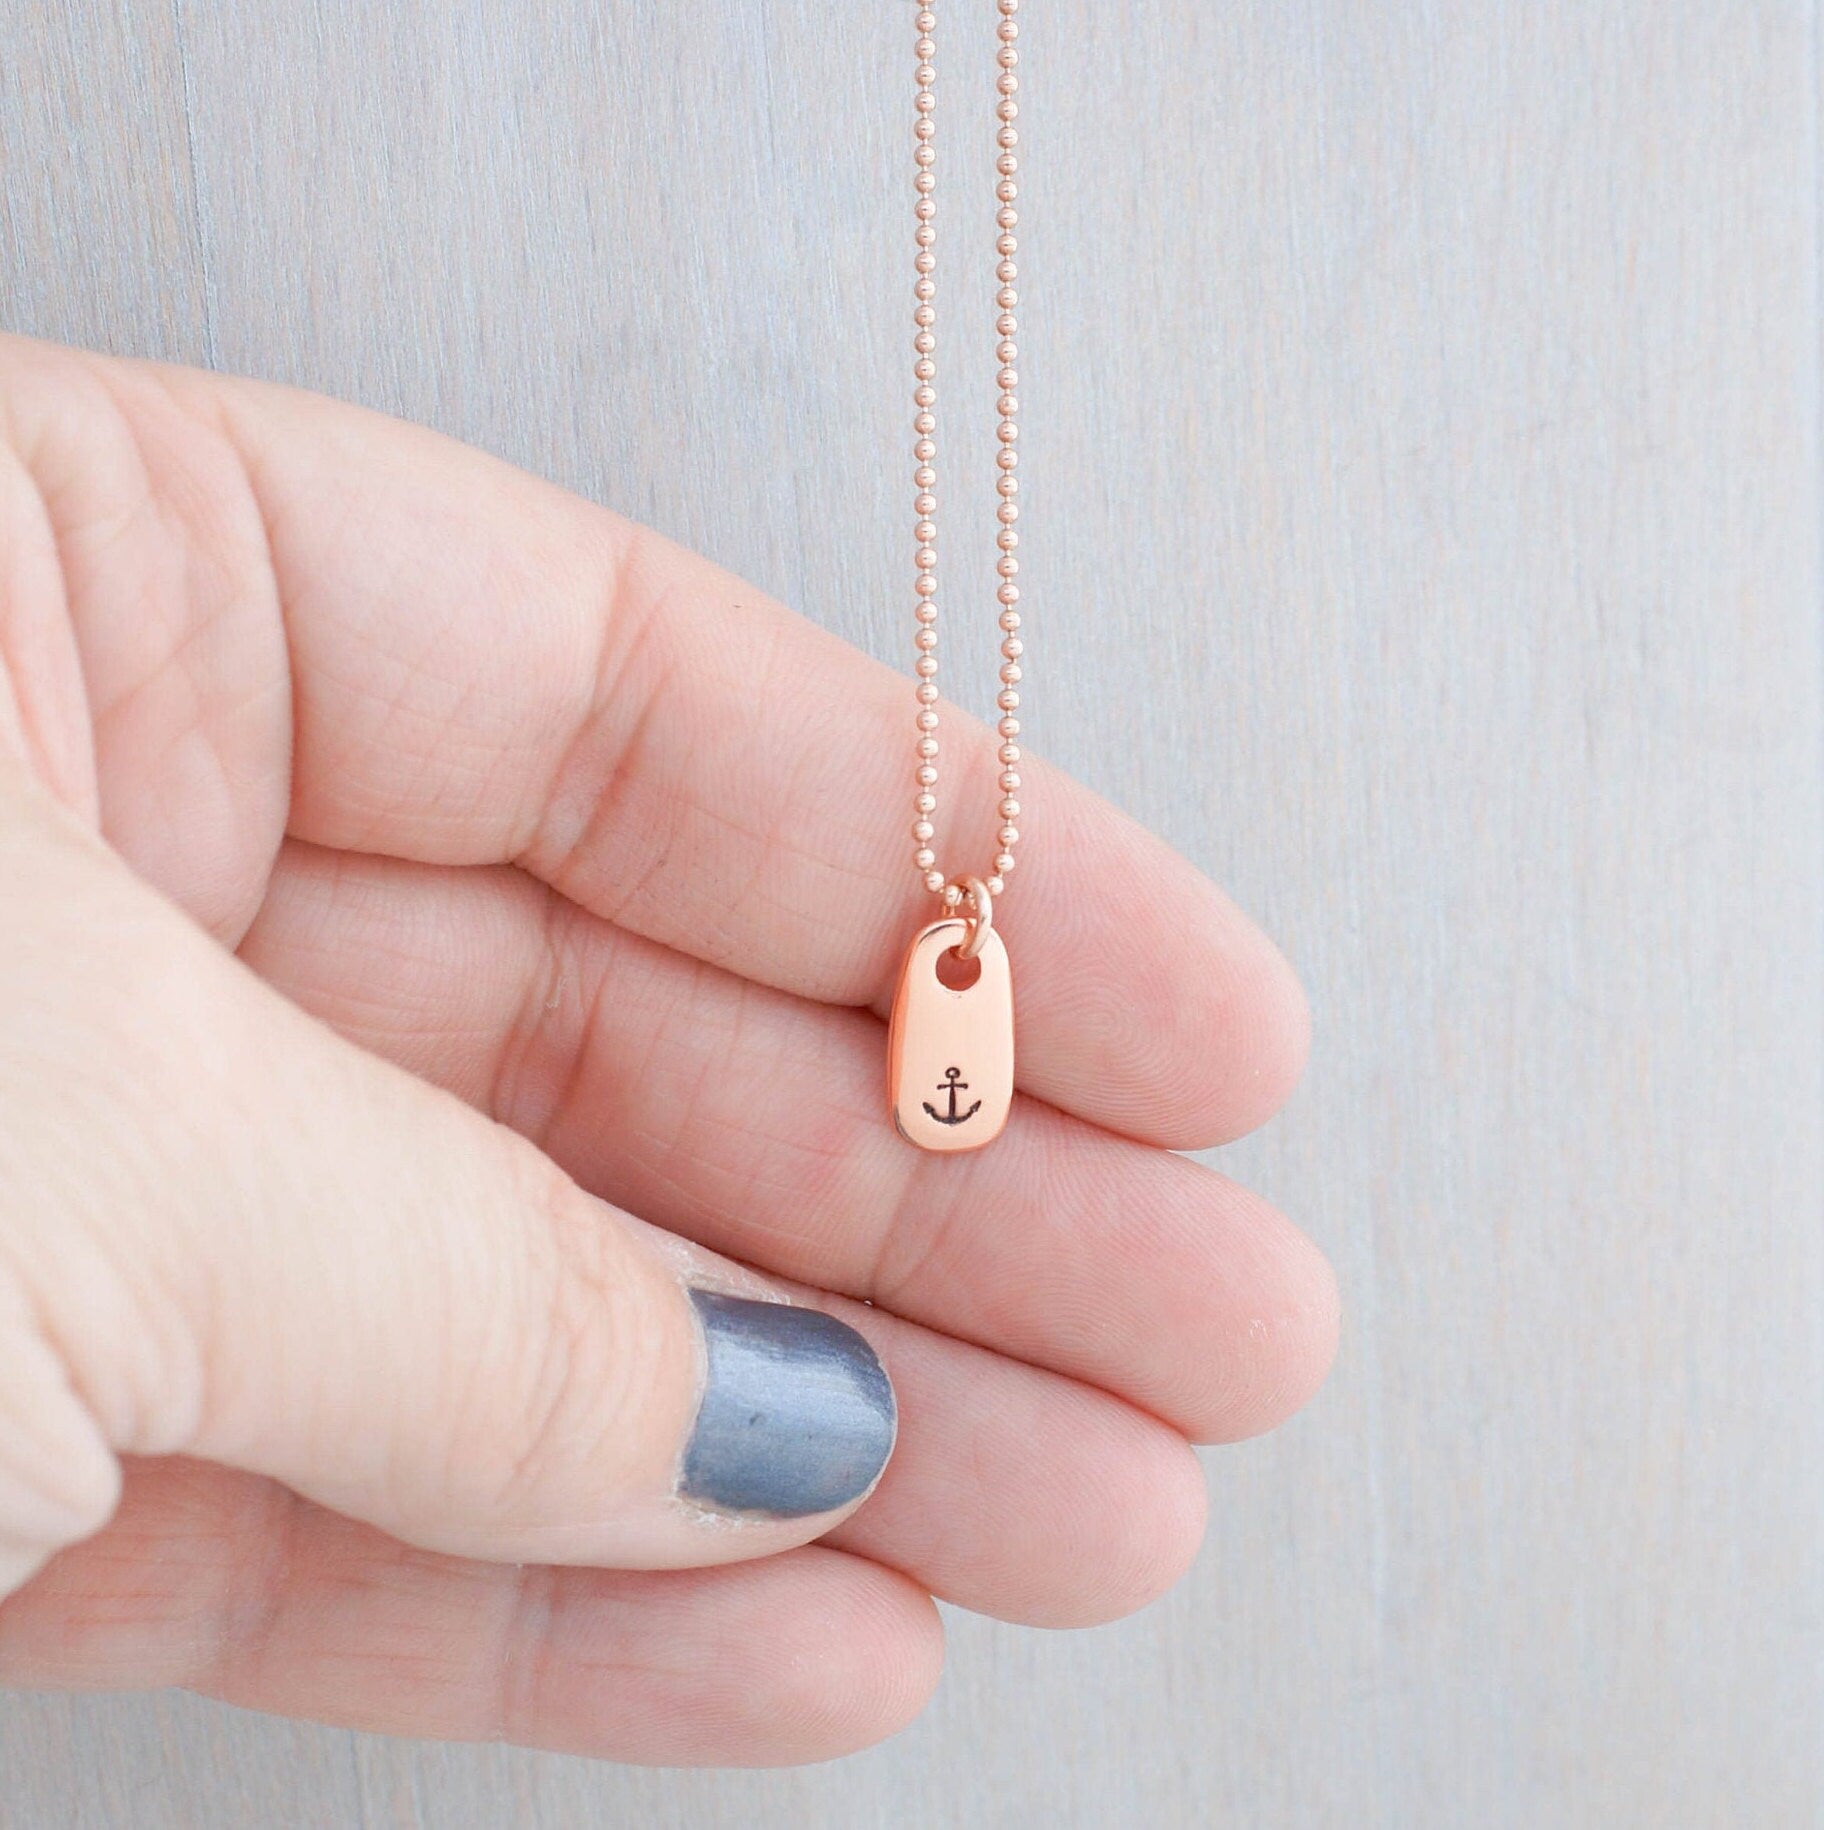 Refuse to Sink Anchor Necklace in Rose Gold held in hand